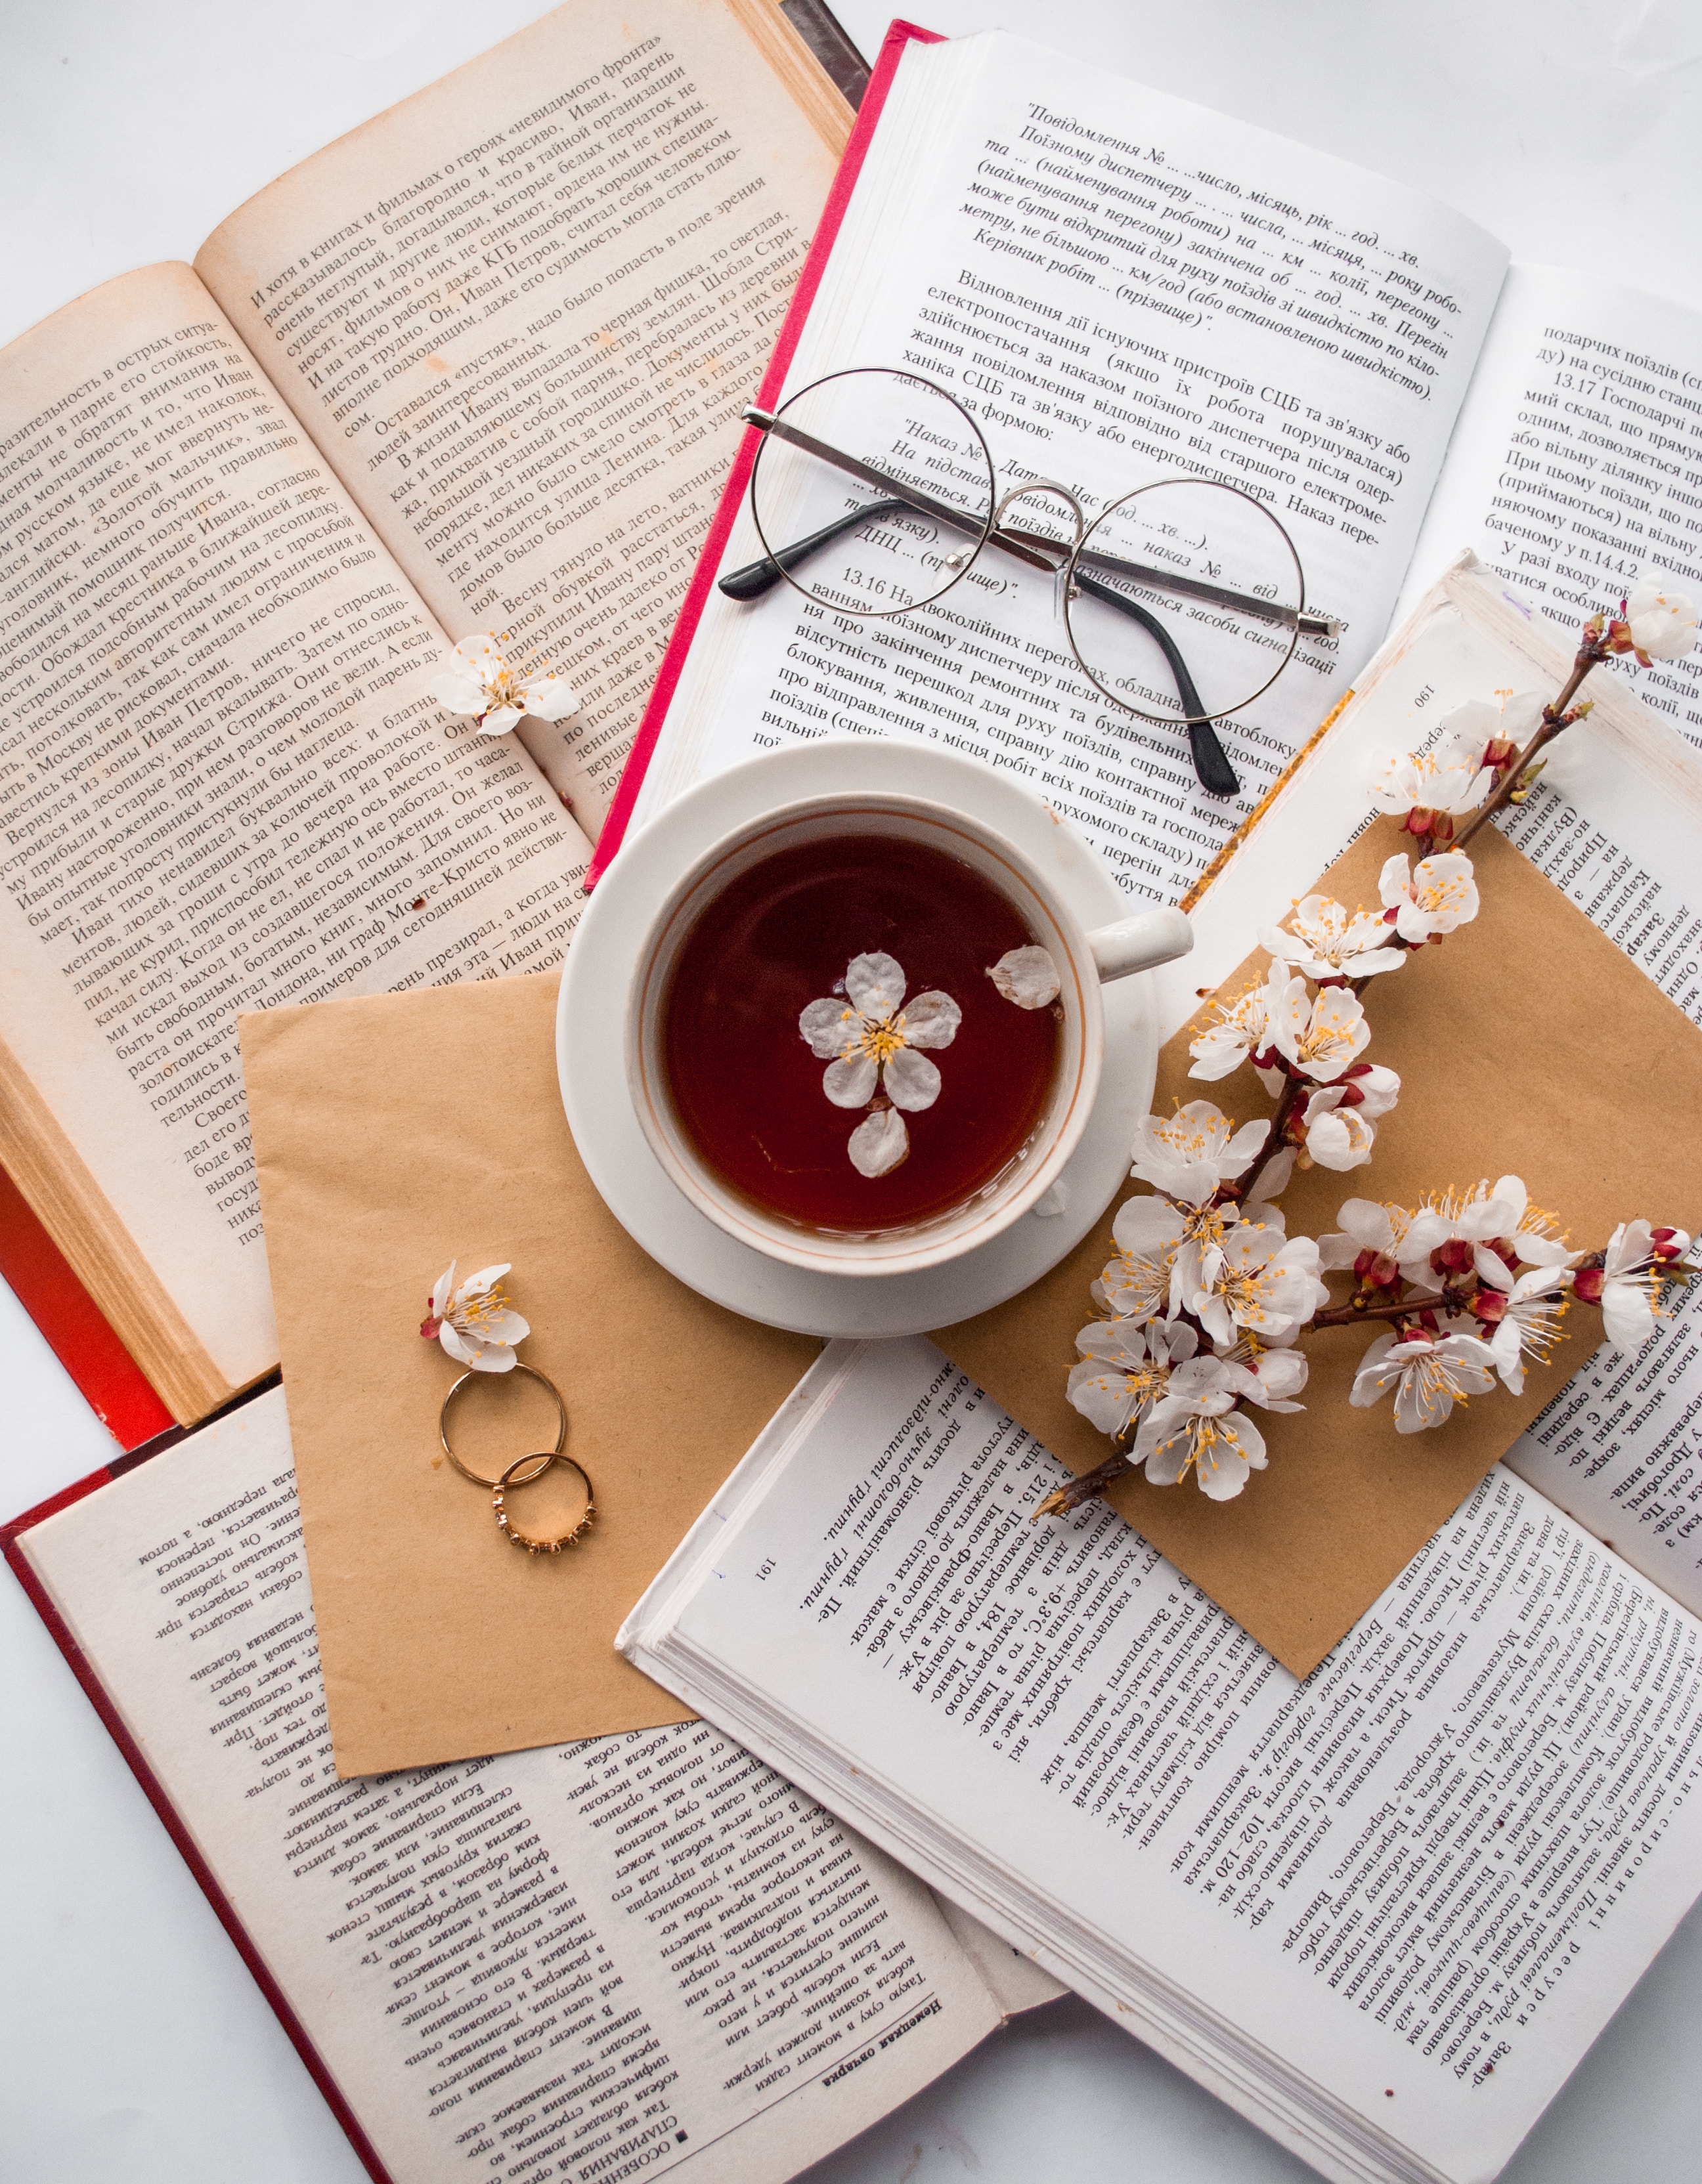 cup, books, flowers, rings, miscellanea, miscellaneous, glasses, spectacles QHD